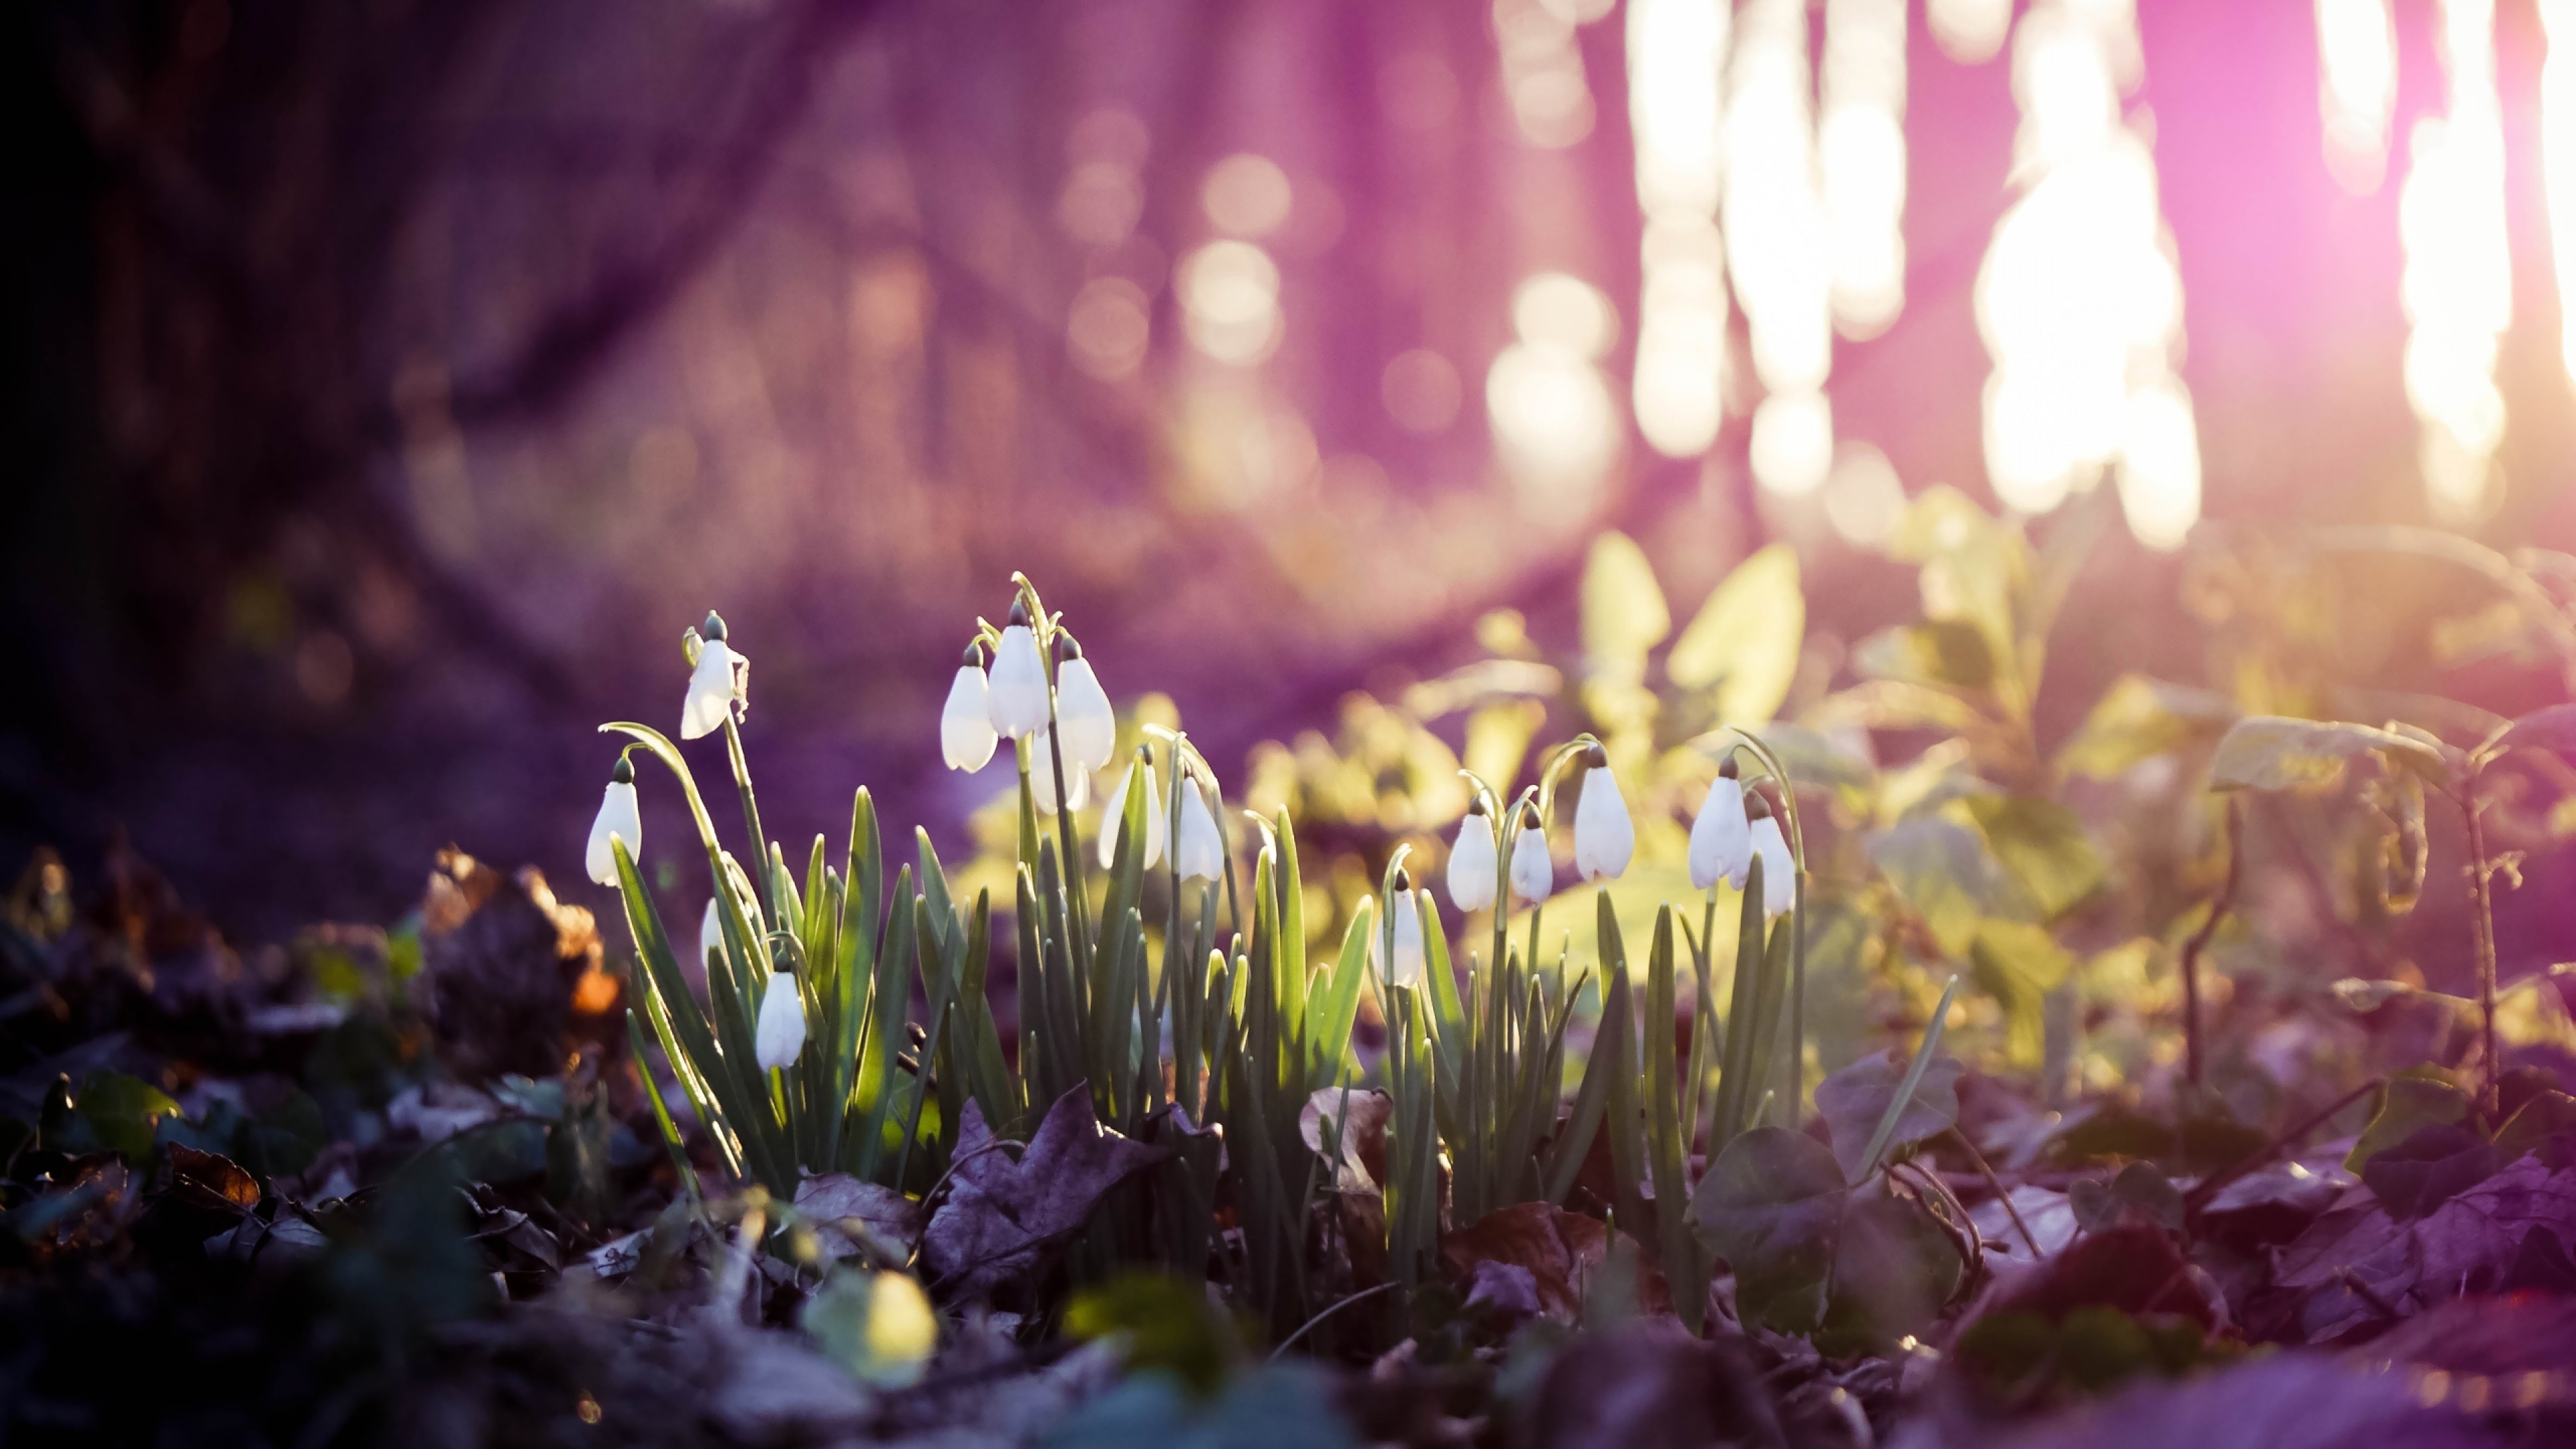 early spring wallpaper hd